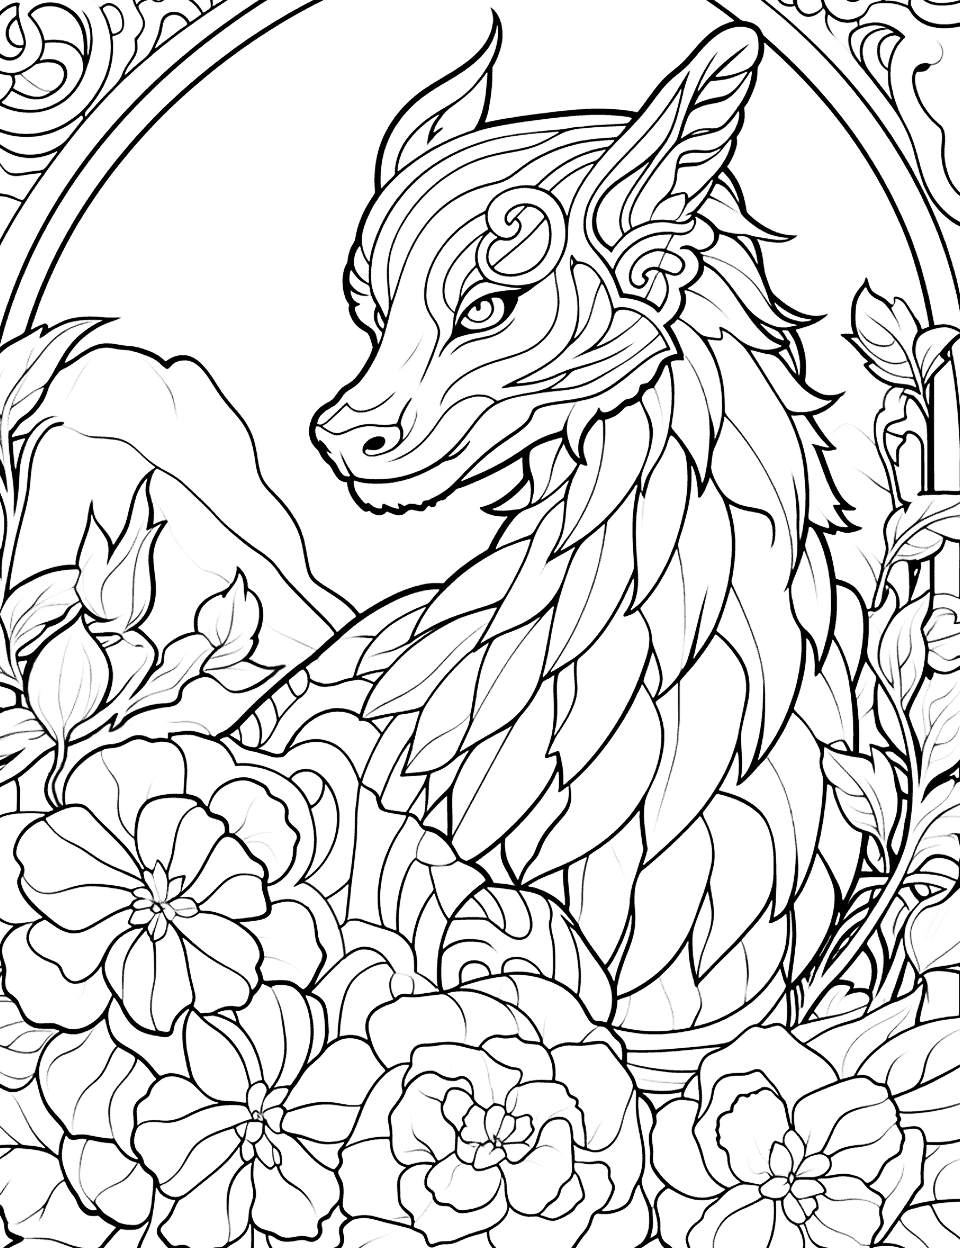 Dragon's Garden Adult Coloring Page - A detailed scene of a dragon resting in a beautiful garden, surrounded by blooming flowers and lush plants.